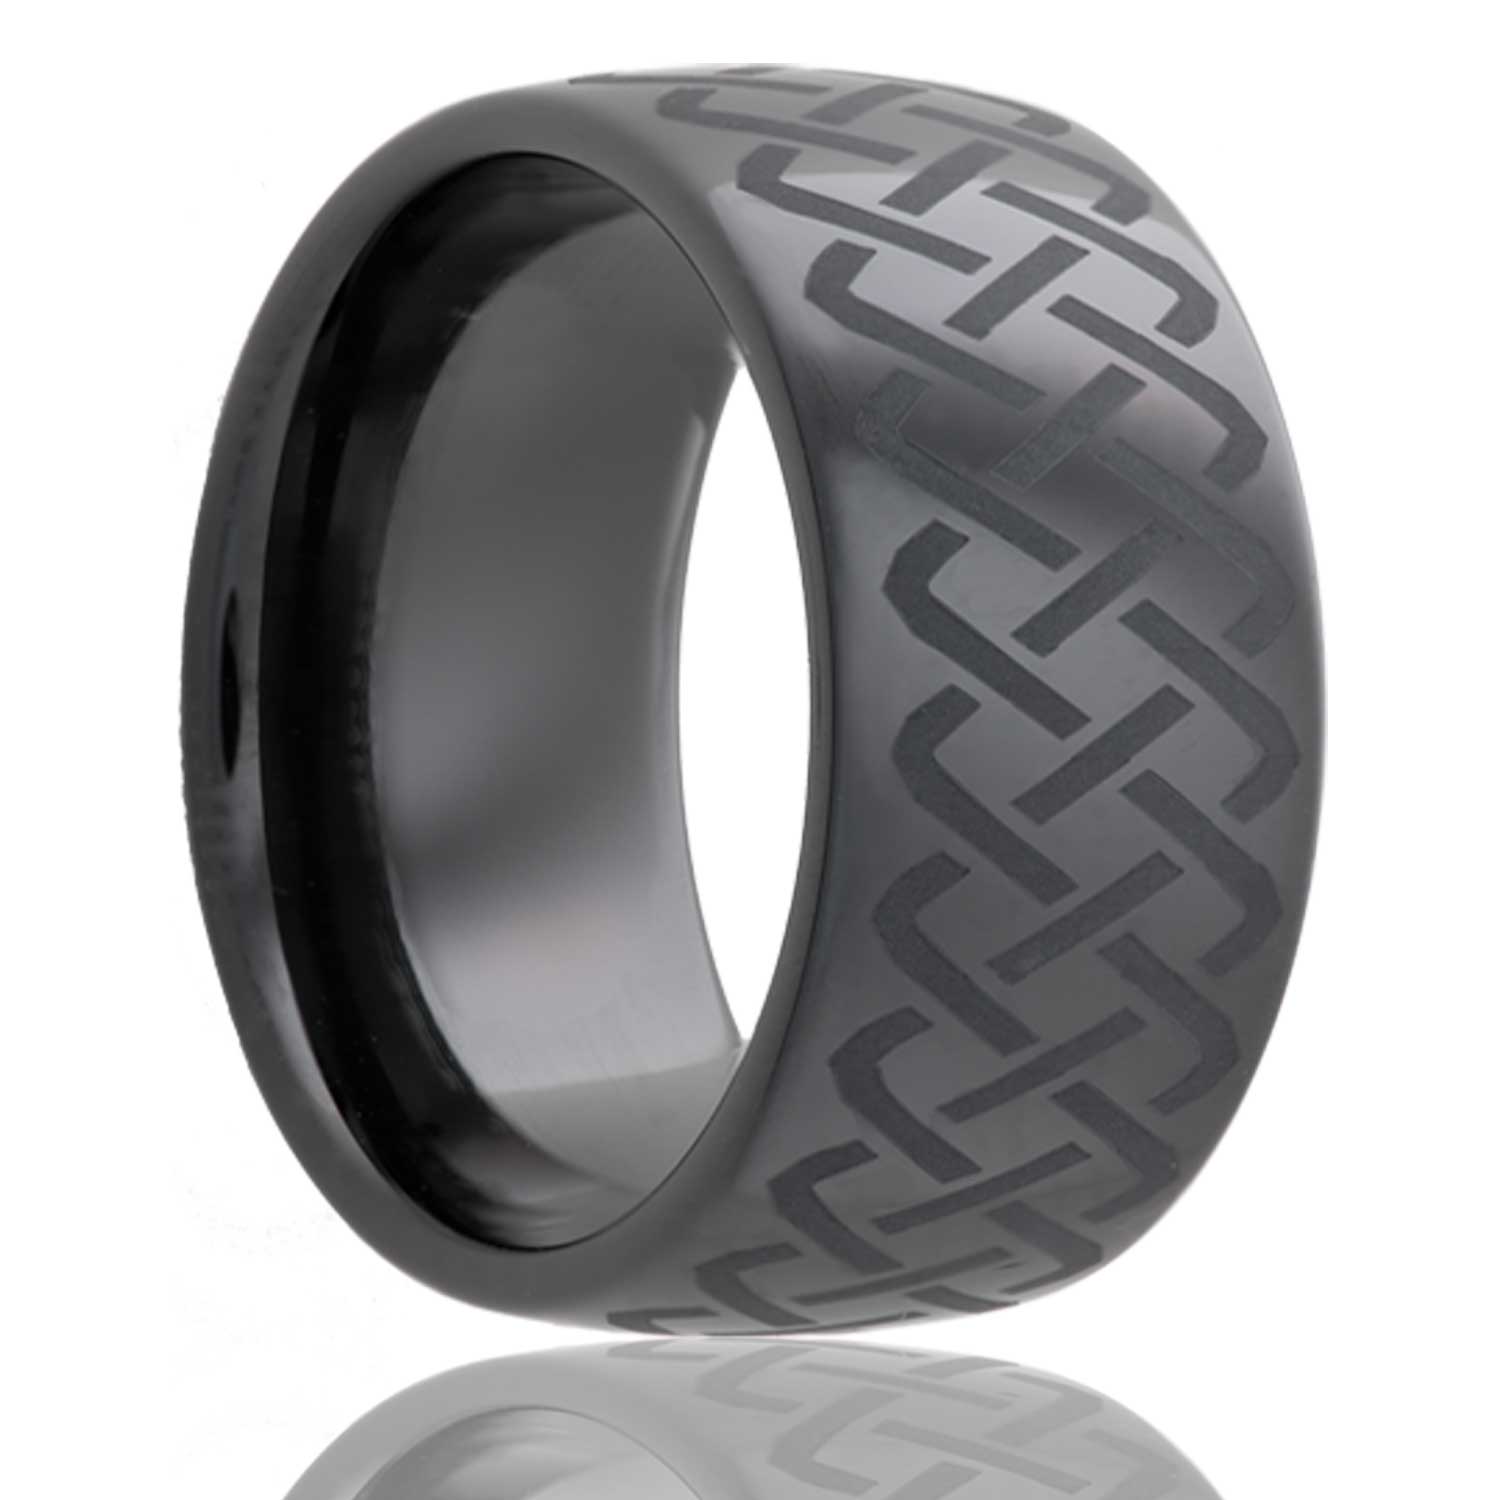 A celtic sailor's knot domed black ceramic wedding band displayed on a neutral white background.